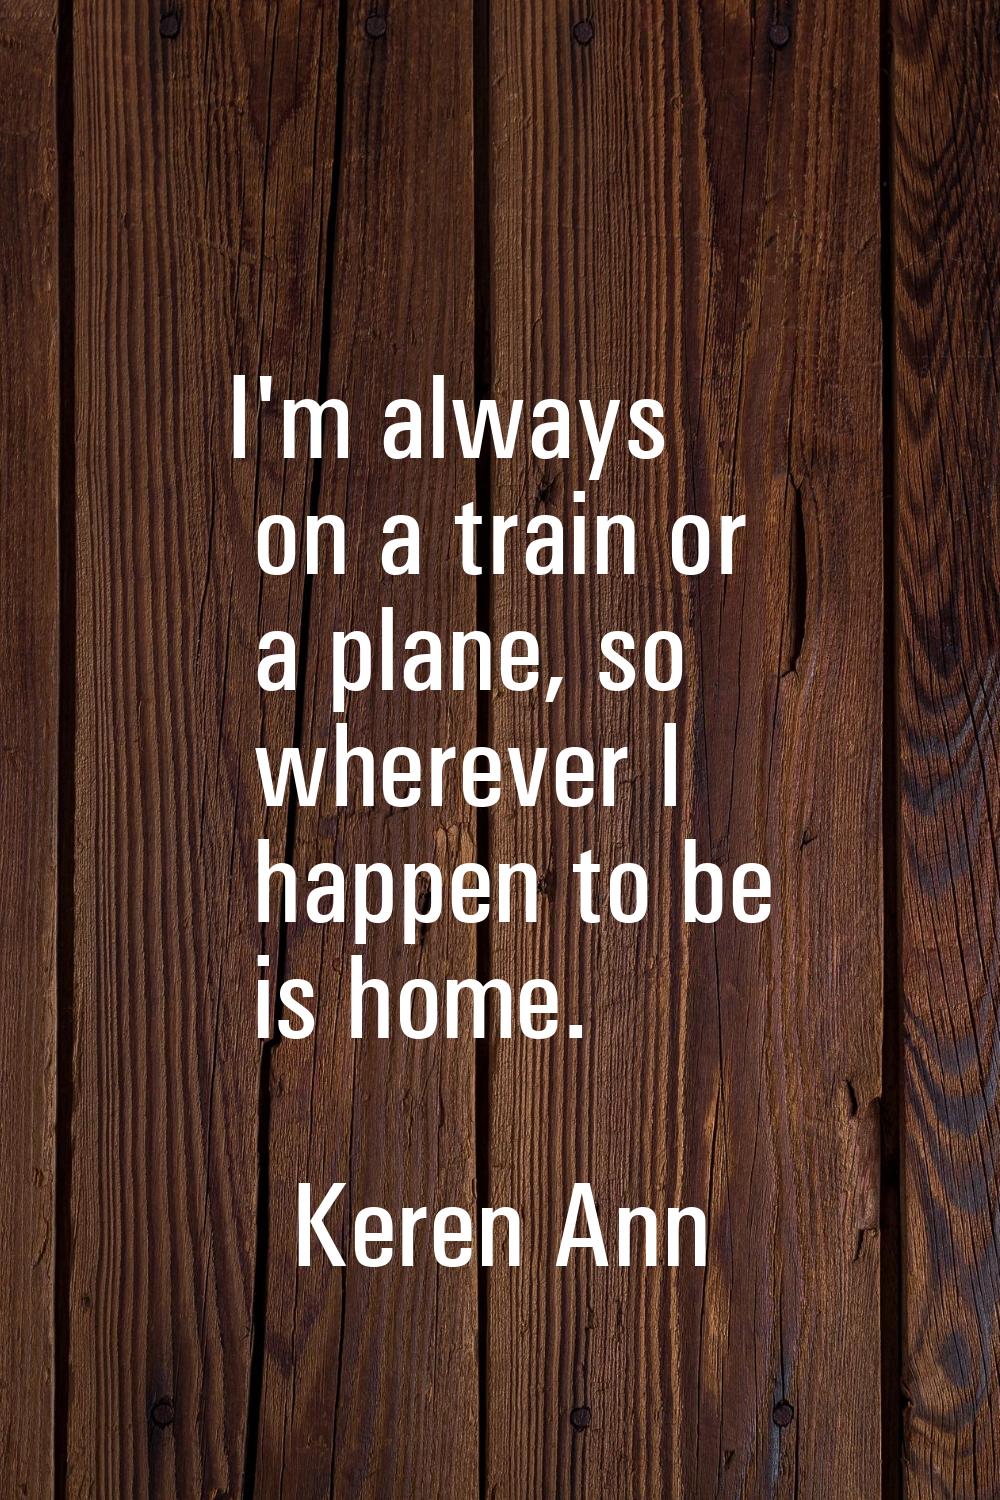 I'm always on a train or a plane, so wherever I happen to be is home.